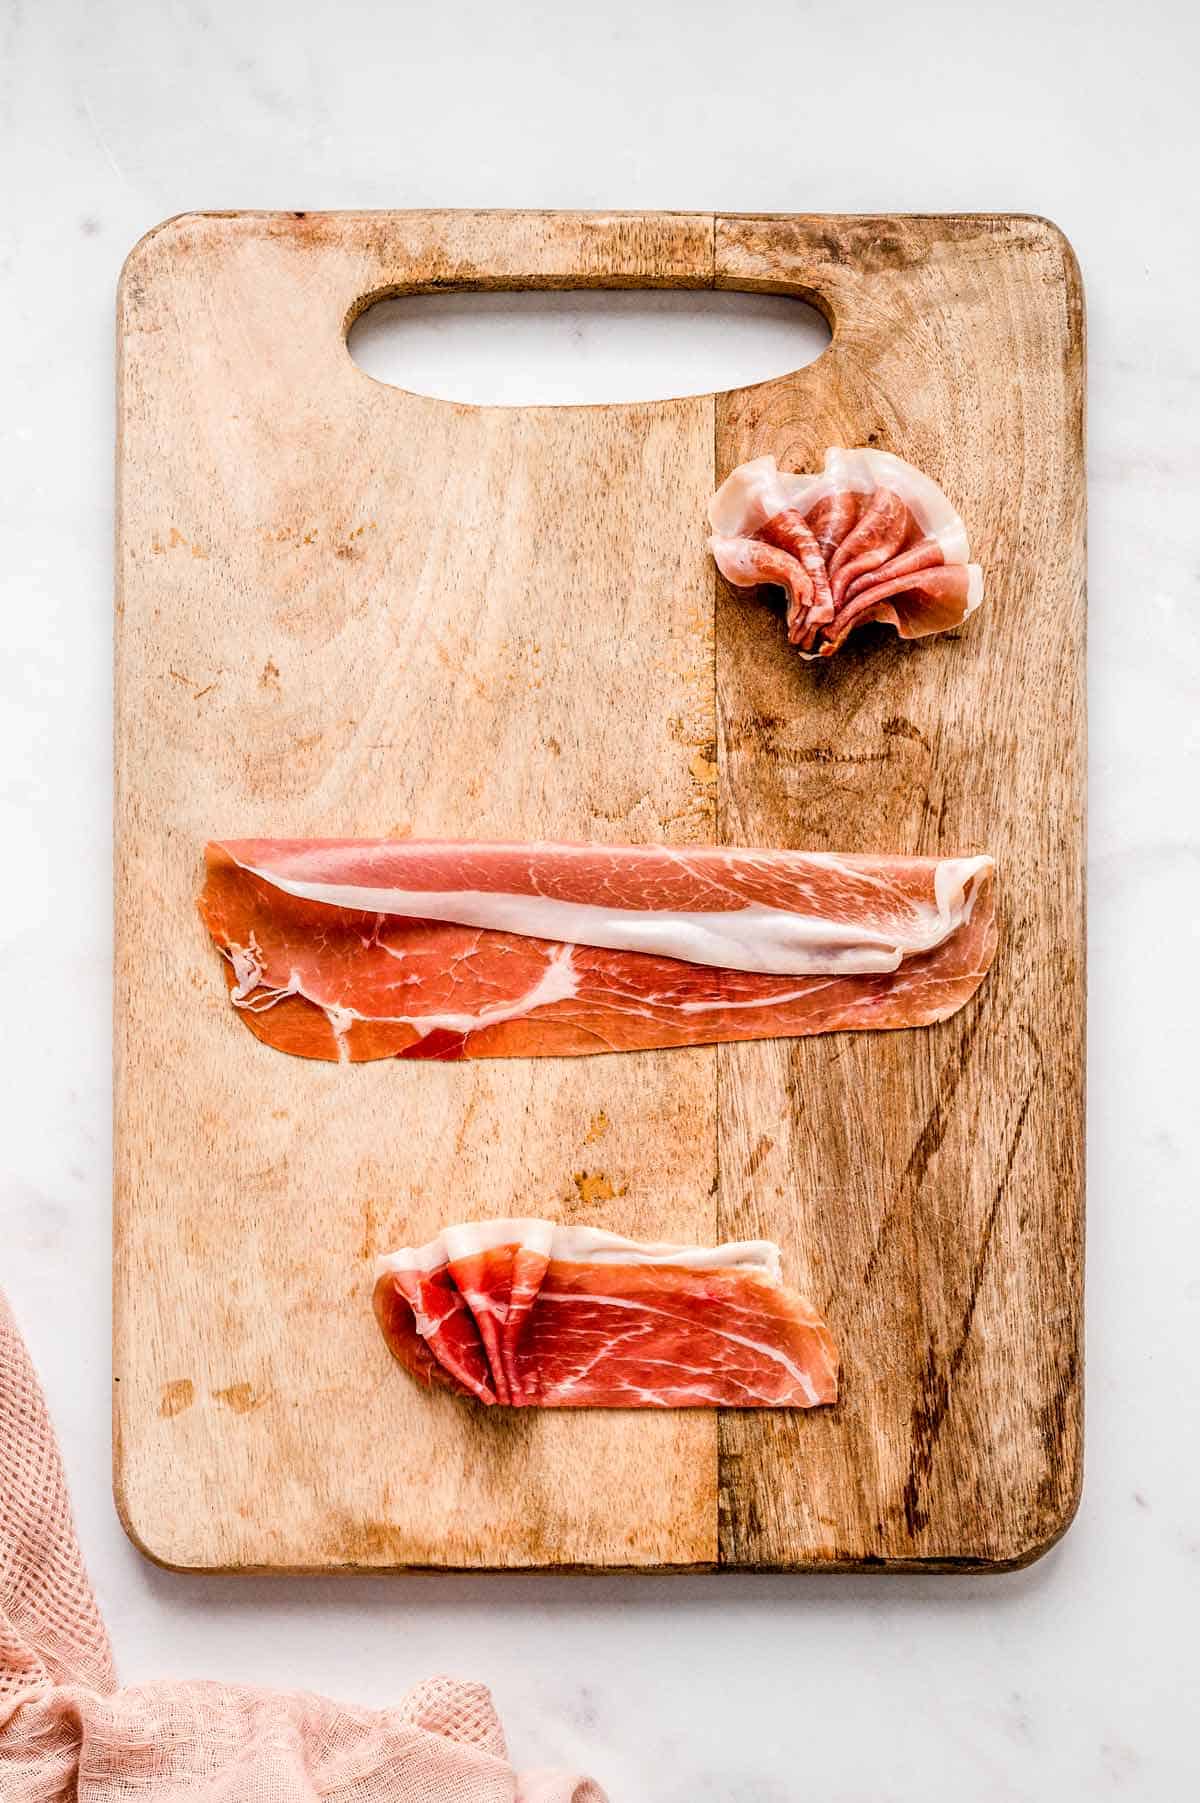 Thinly sliced meat on a wooden cutting board demonstrating how to make prosciutto fans.